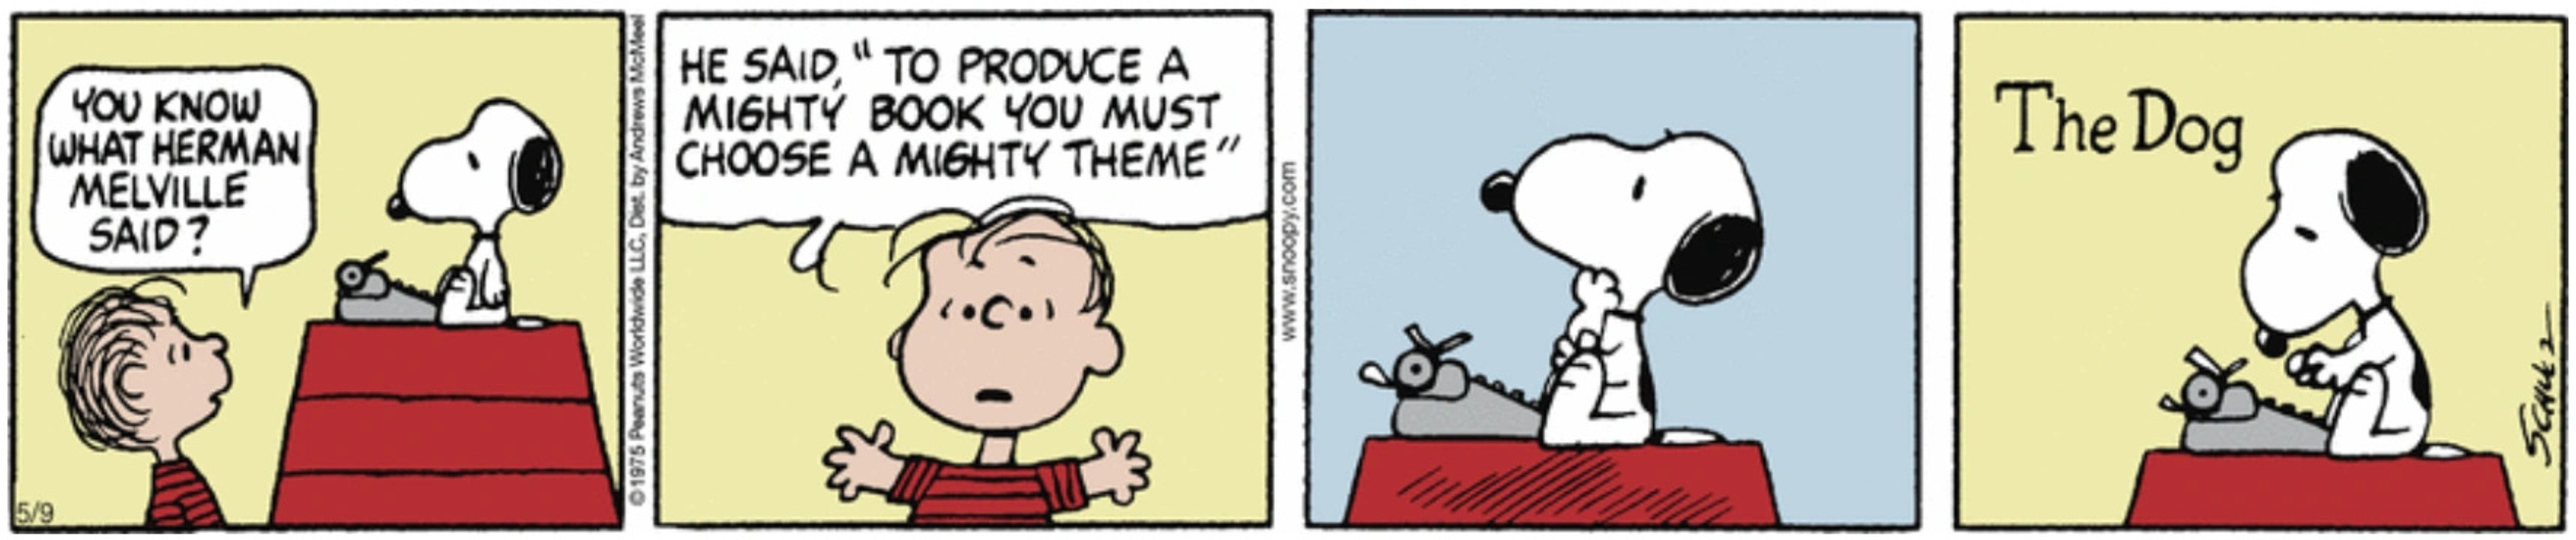 Linus talking to Snoopy, giving him writing advice via a Herman Melville quote.